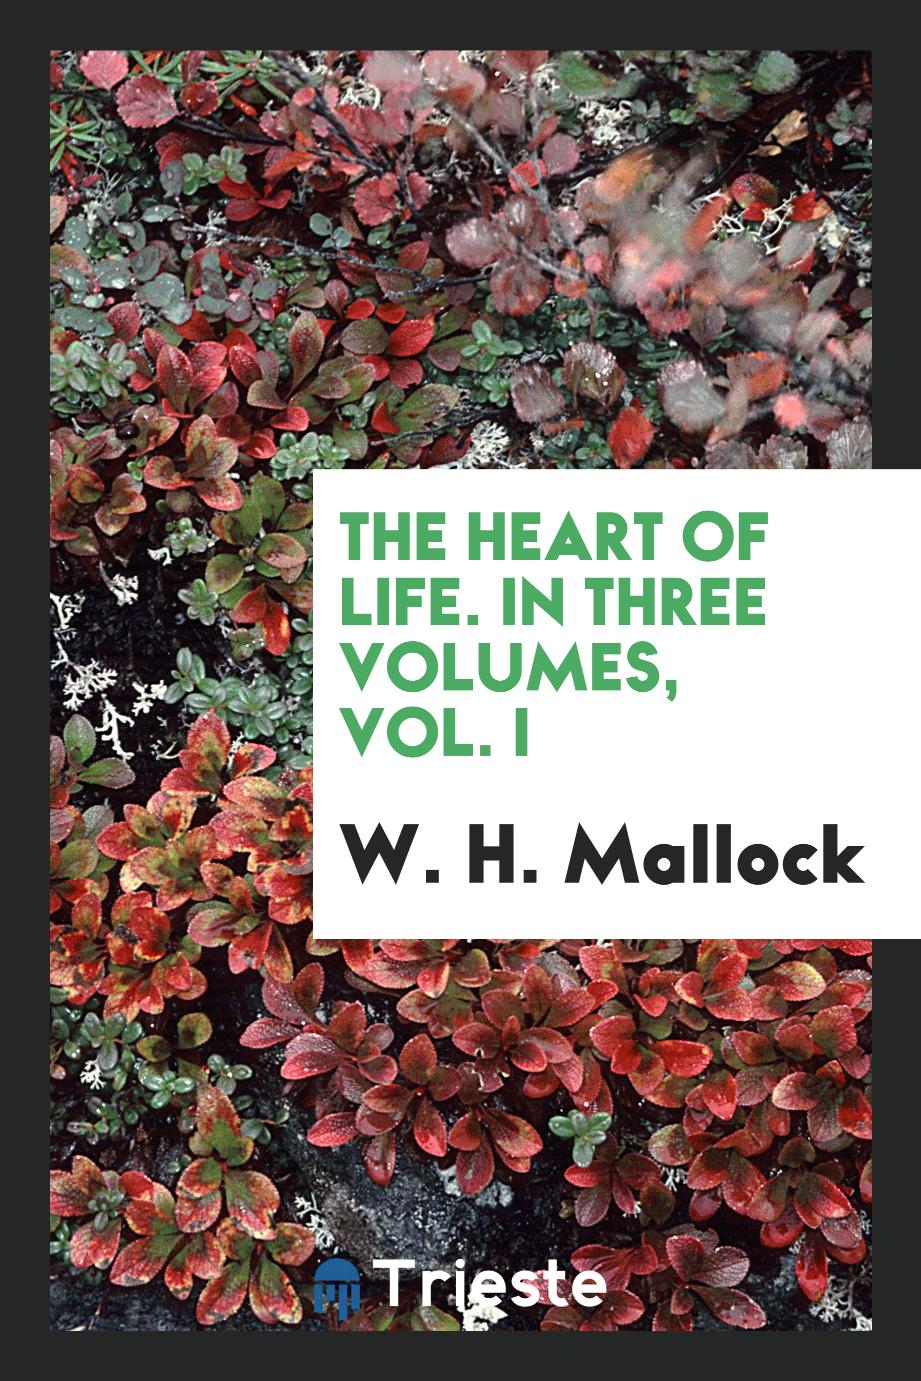 The Heart of Life. In Three Volumes, Vol. I